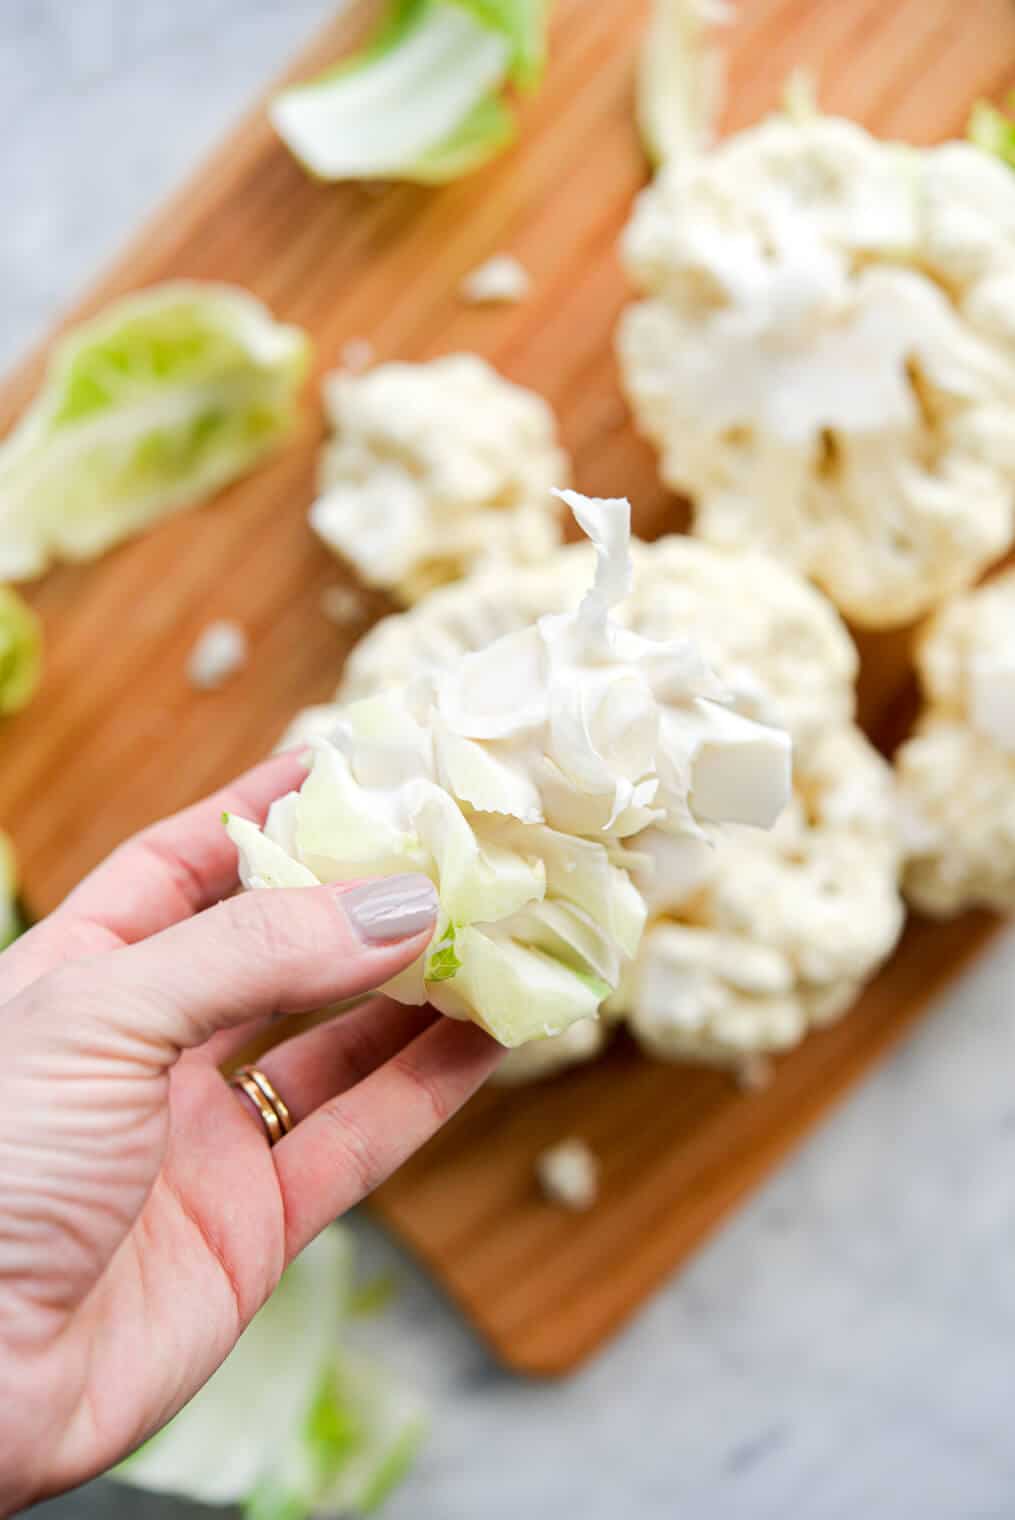 Close up of hand holding cauliflower stem with cauliflower florets and cutting board blurred in background